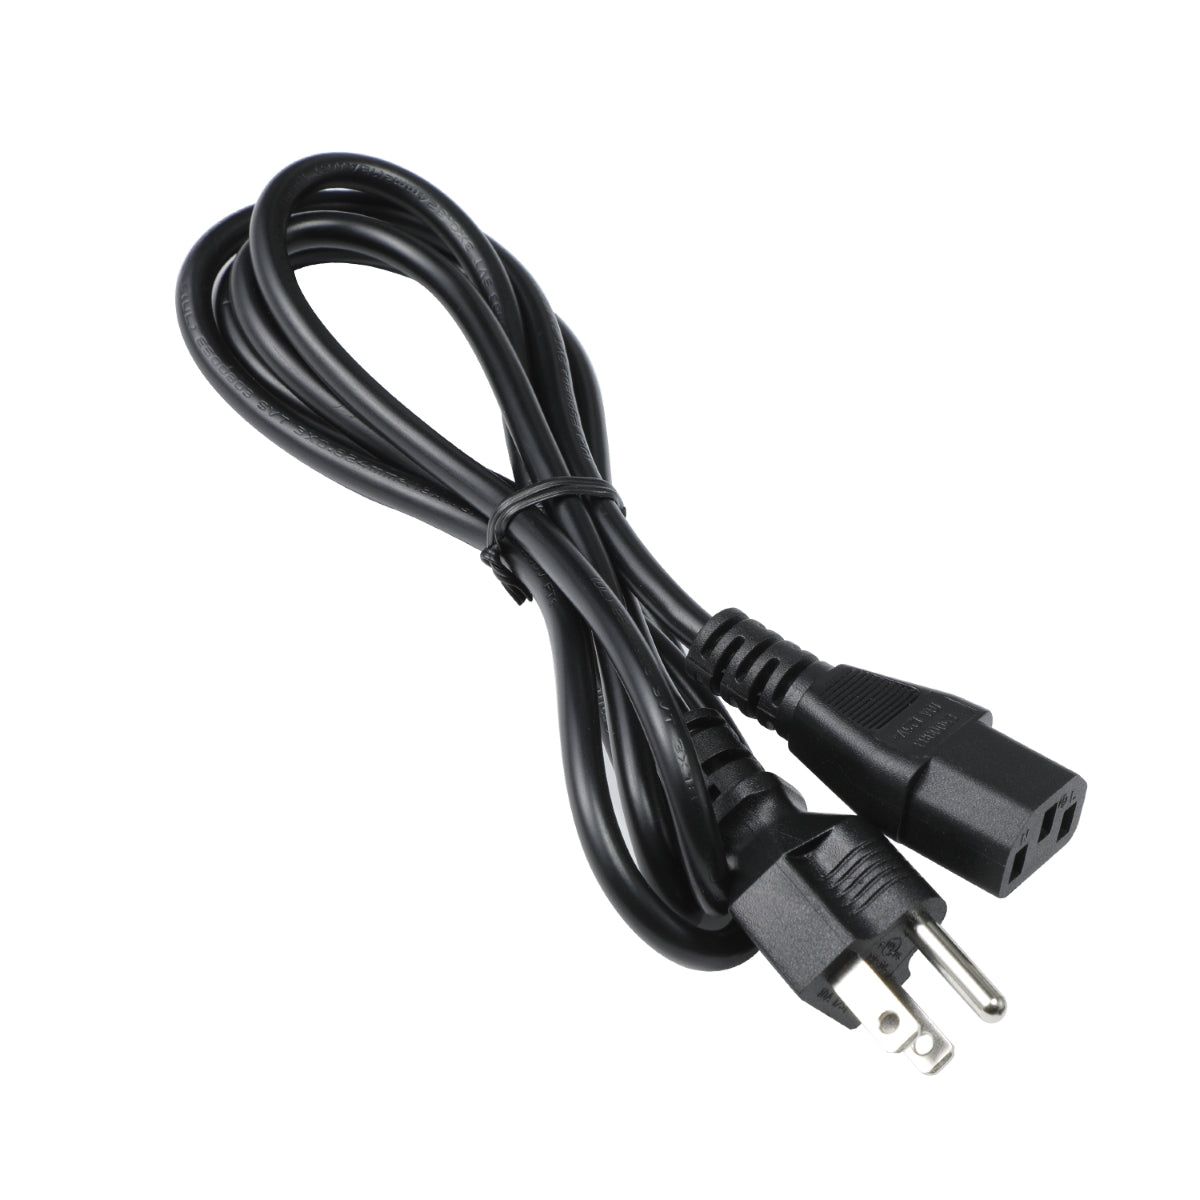 Power Cable for Philips 329P9H Monitor.